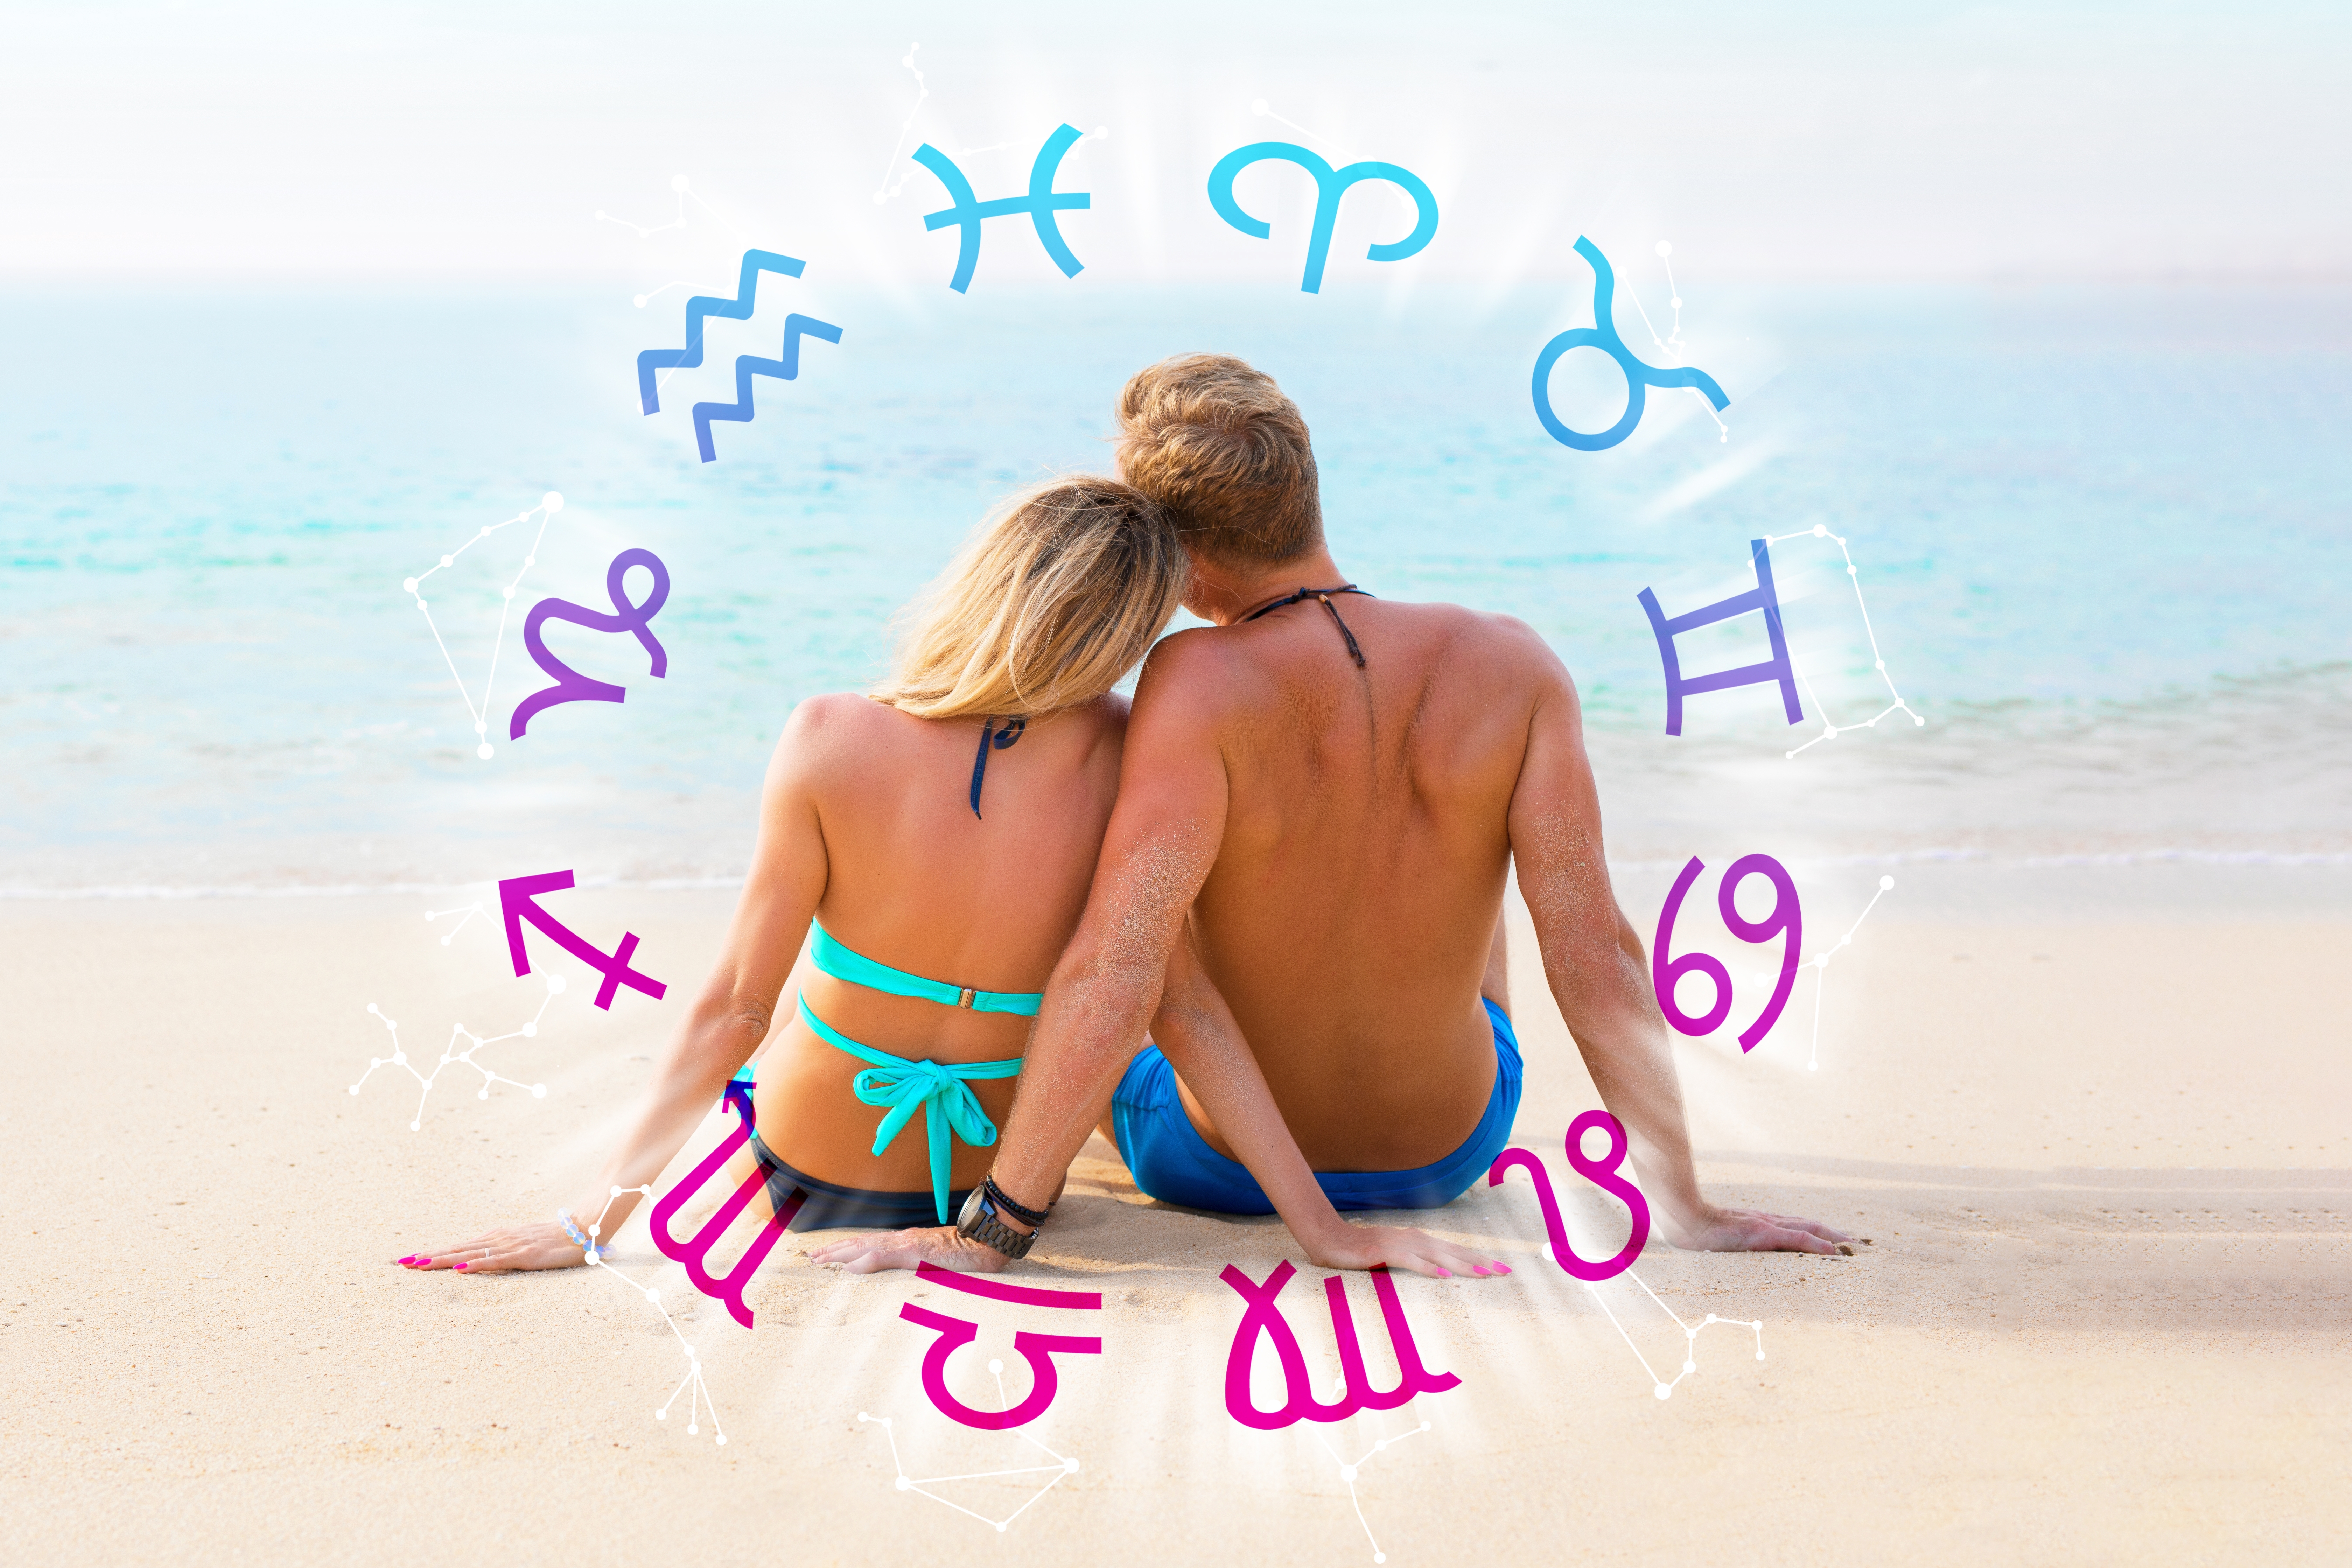 A couple relaxing at the beach surrounded by the zodiac signs | Source: Shutterstock